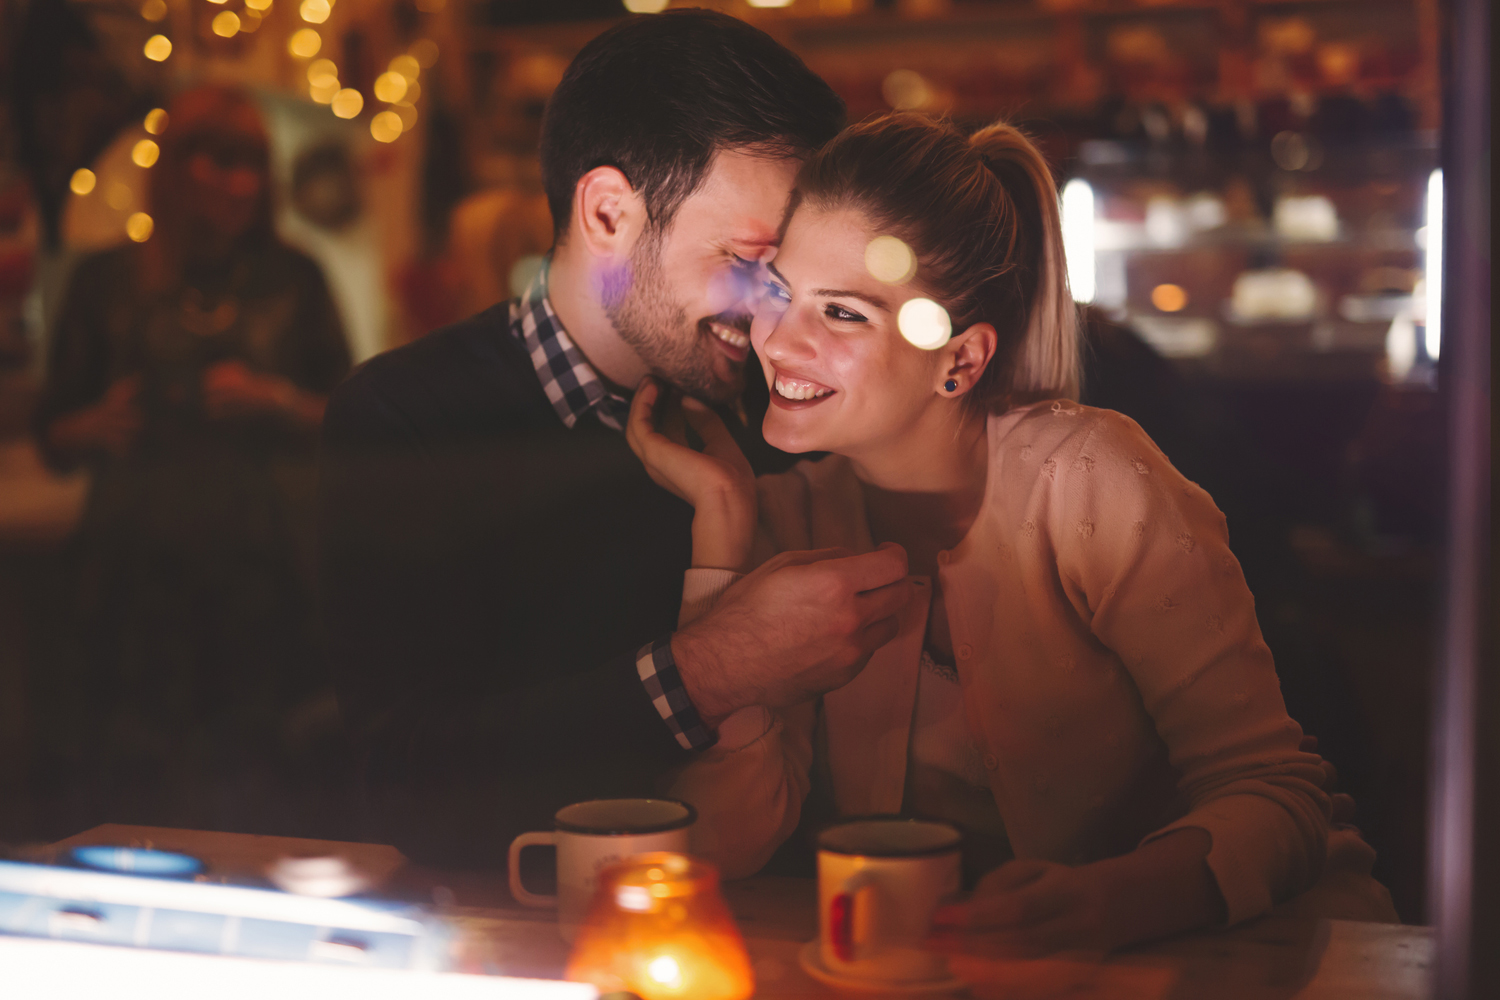 Romantic couple dating at night in pub